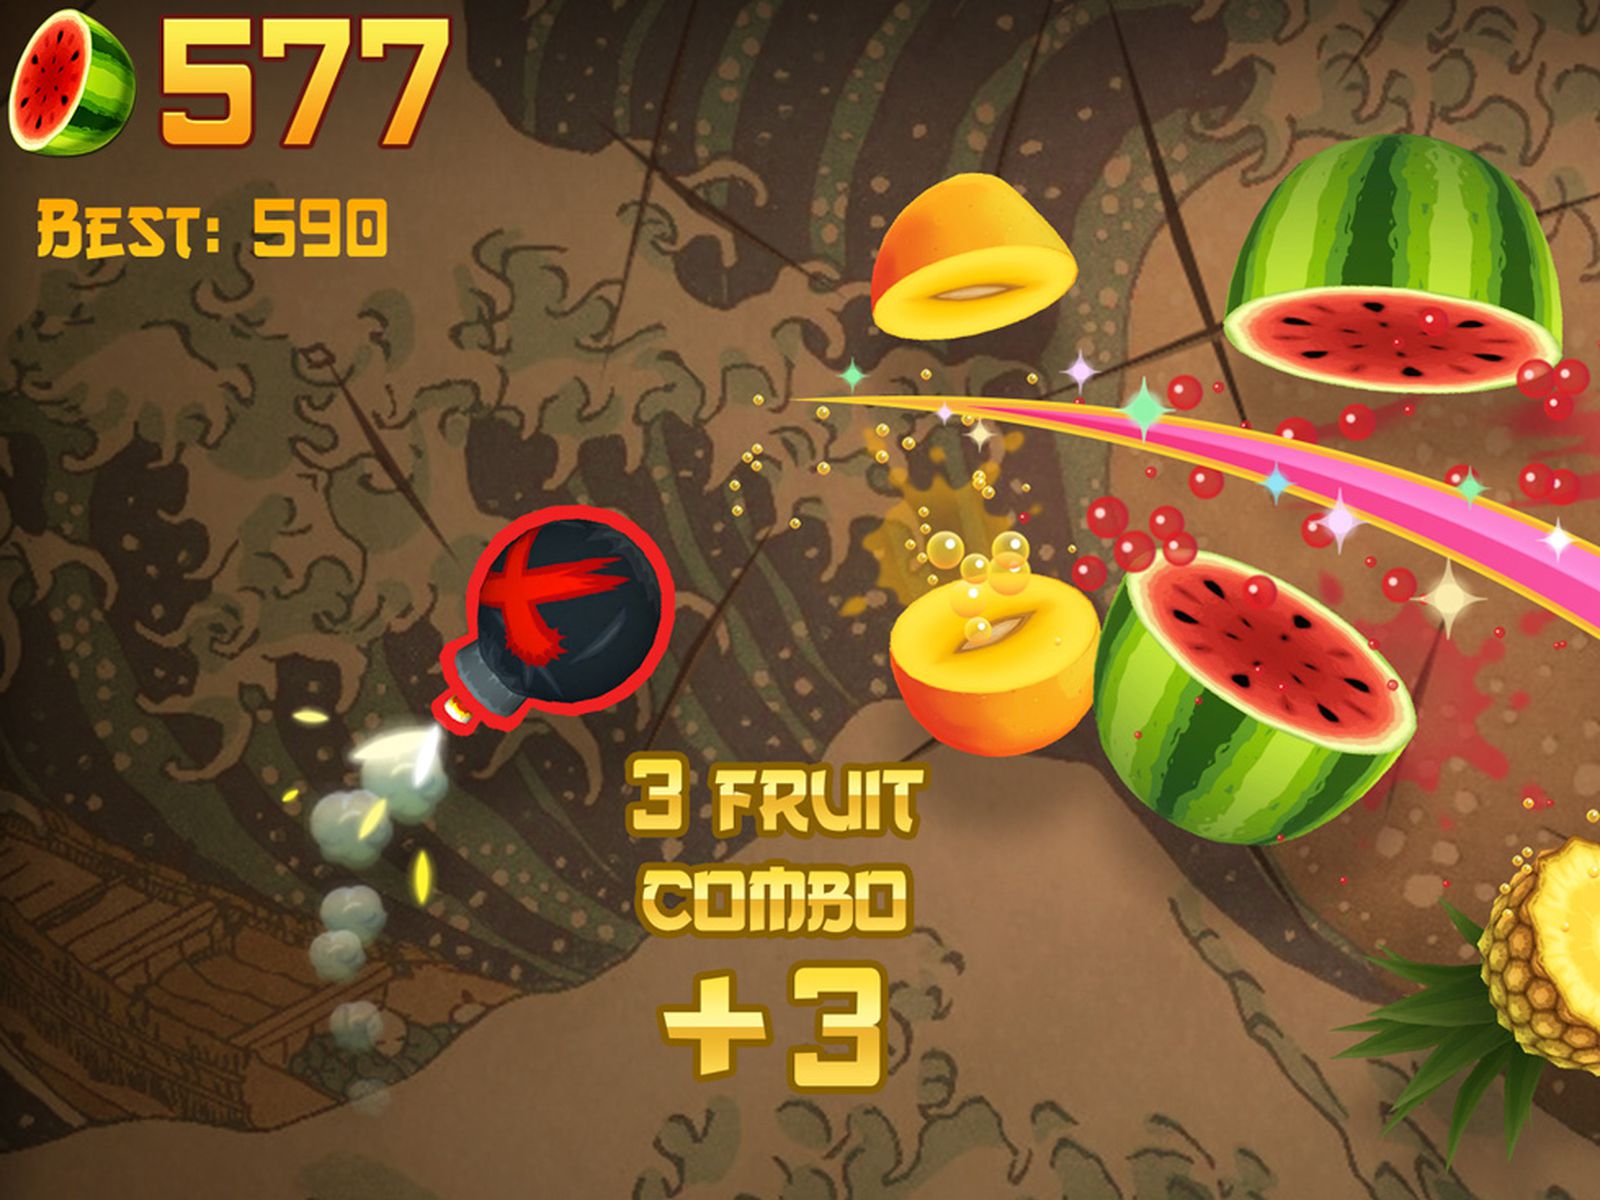 Apple Arcade Adds 30 Classic Games Including 'Fruit Ninja' and